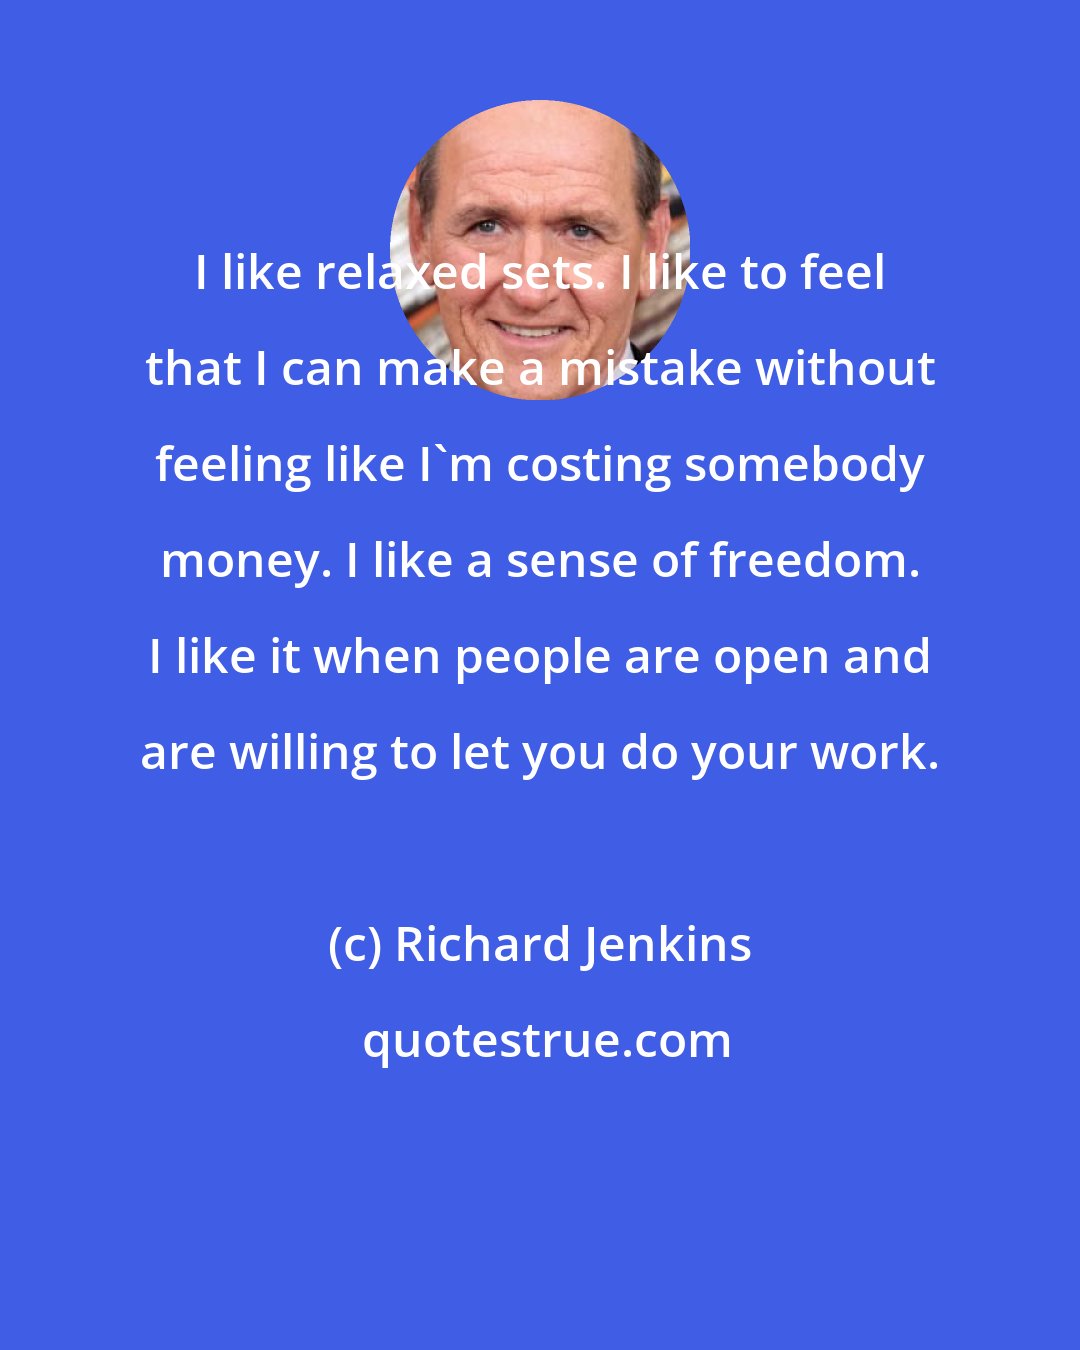 Richard Jenkins: I like relaxed sets. I like to feel that I can make a mistake without feeling like I'm costing somebody money. I like a sense of freedom. I like it when people are open and are willing to let you do your work.